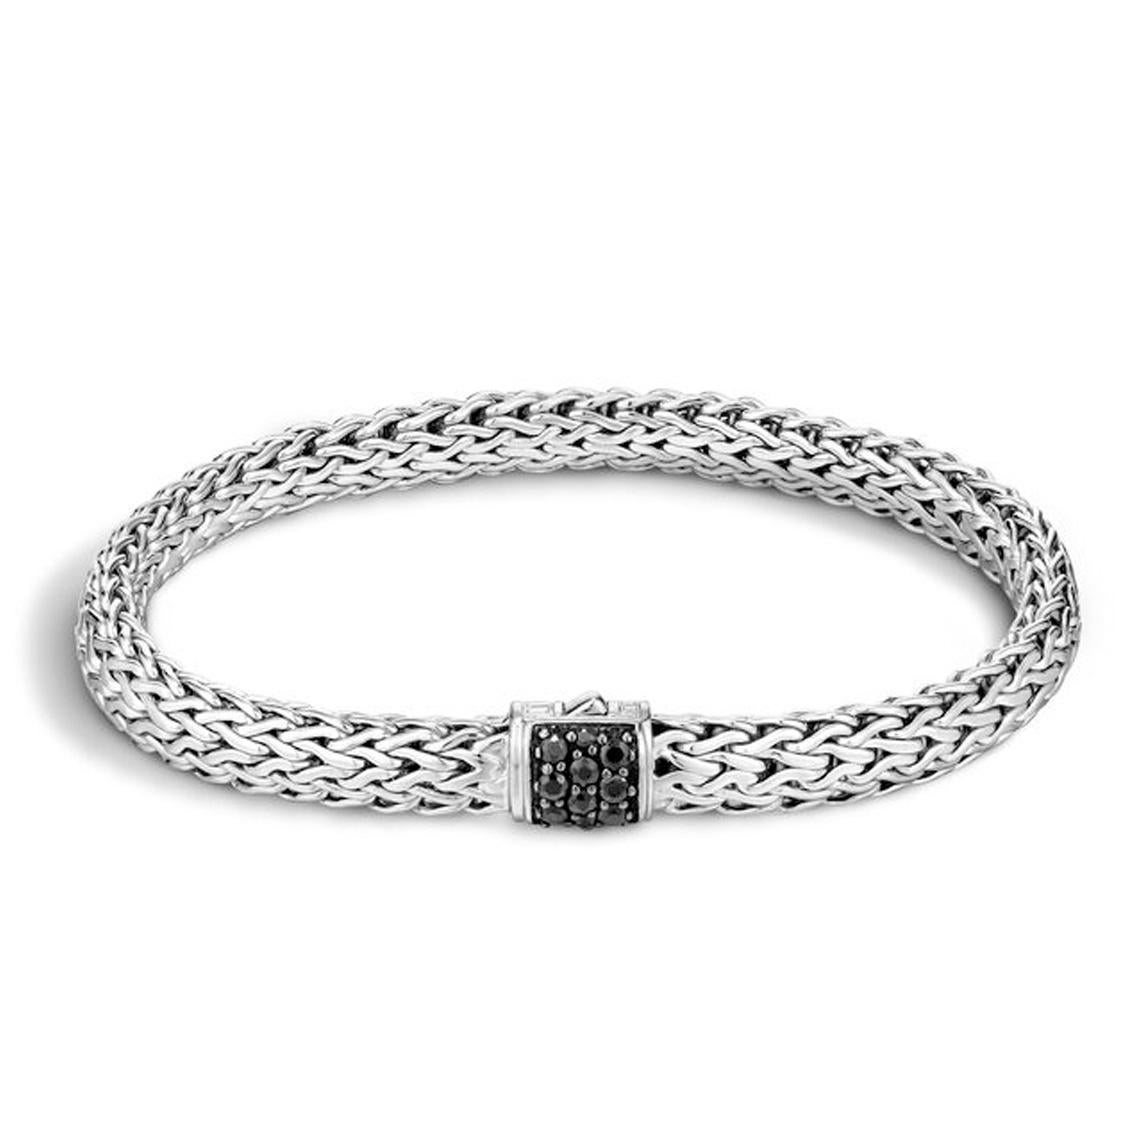 From John Hardy's Classic Chain collection, this sterling silver bracelet features a black sapphire pave set pusher clasp. The bracelet measures 5mm in width and has a length of 6 3/4 inches.

Sku 1705